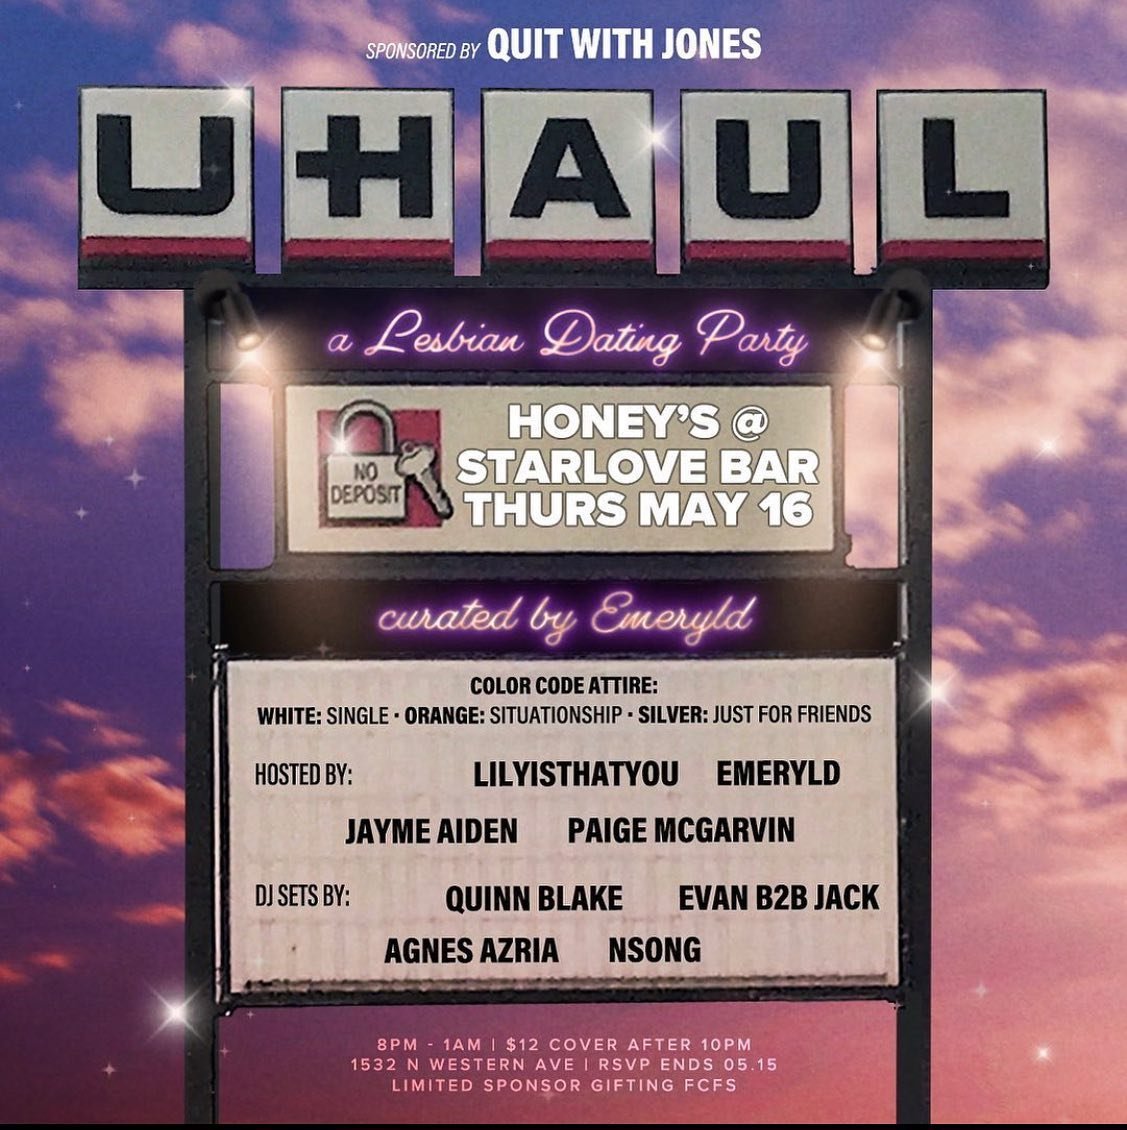 This Thursday is the launch of UHAUL PARTY: A LESBIAN DATING PARTY, curated by @lilemeryld. 

And there is a dress CODE💅🏽:

🤍White= Single 
🧡Orange= Situationship 
🥈Silver= Just For Friends

Date: Thursday 5/16
Time: 8PM -1 AM
FREE entry before 